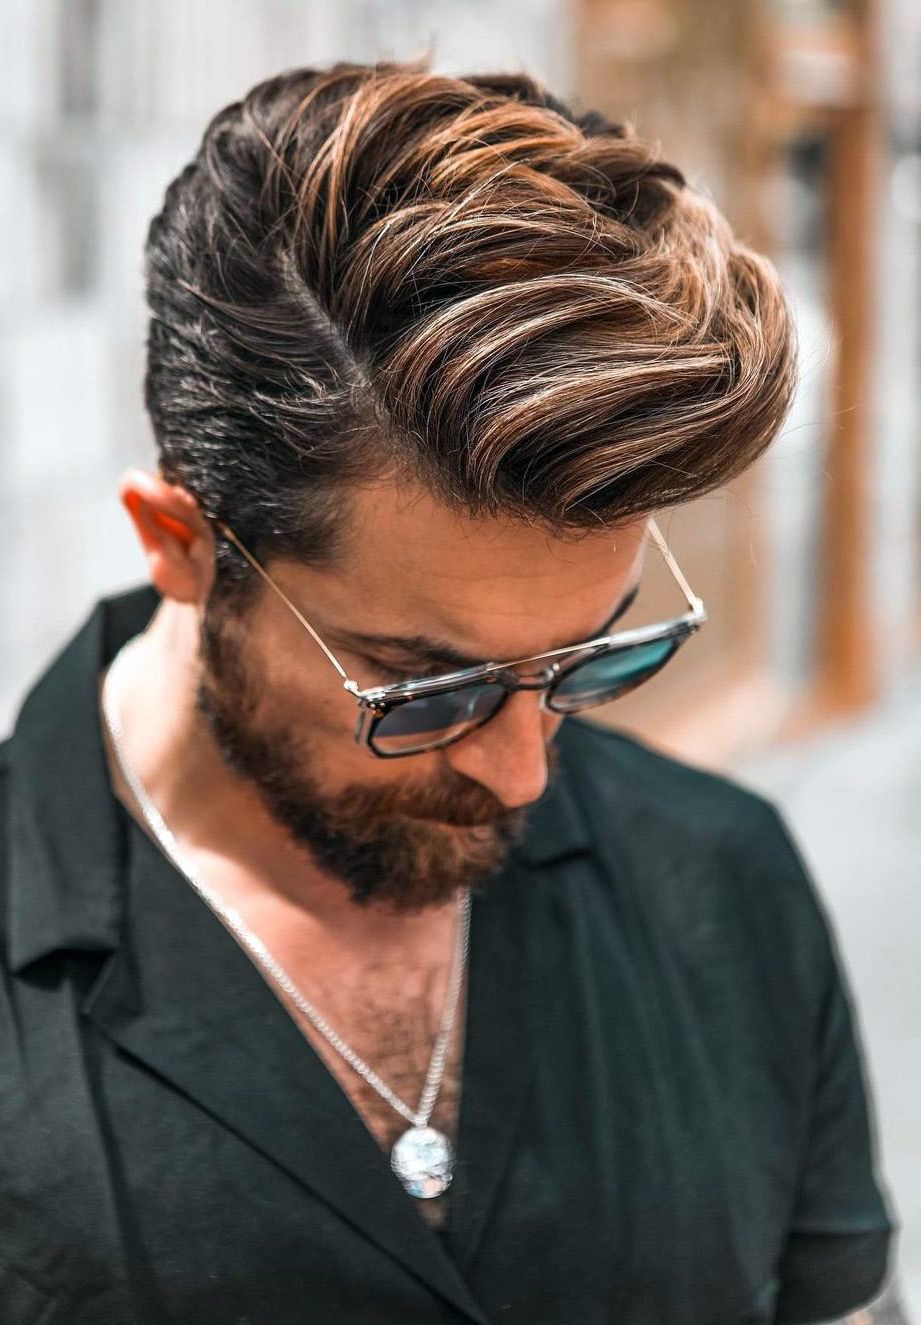 30 Side Part Haircuts: A Classic Style For Gentlemen | Haircut Inspiration Pertaining To Newest Medium Hairstyles With Side Part (View 9 of 25)